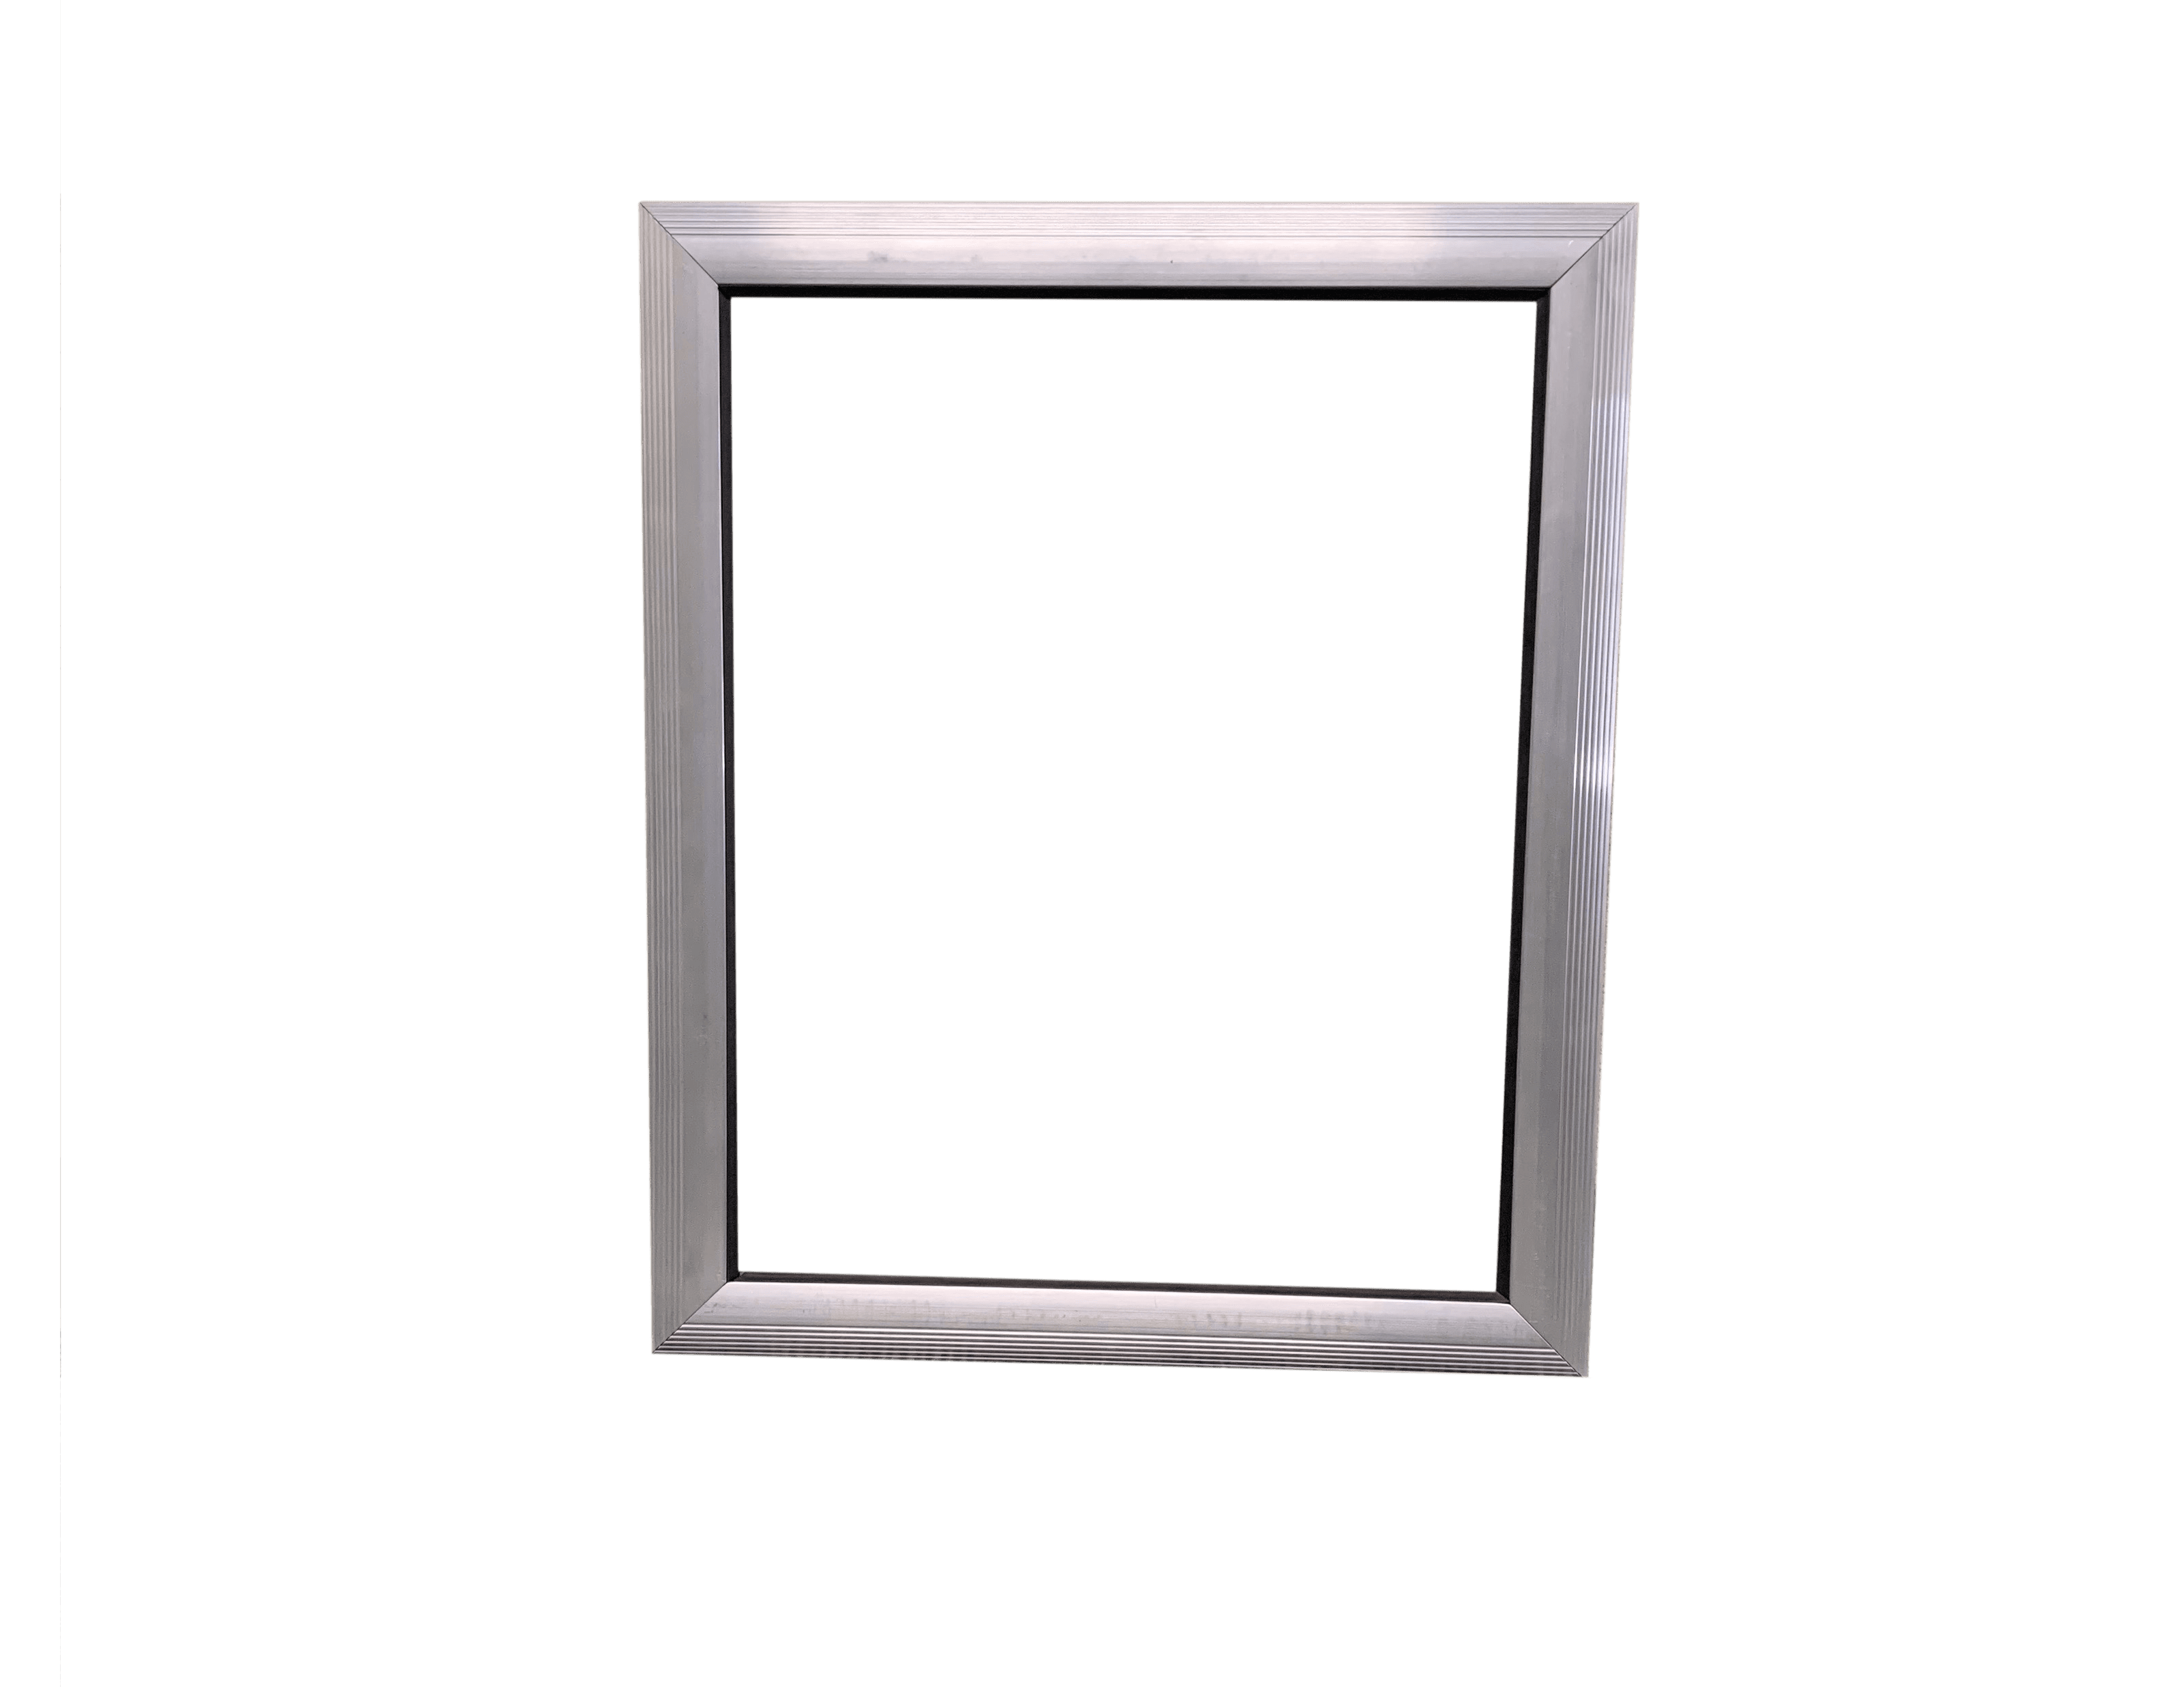 Saginaw Control SCE-AW1208SG Viewing Window - Extruded Aluminum Safety Glass, Height:16.00", Width:12.00", Depth:0.98", 